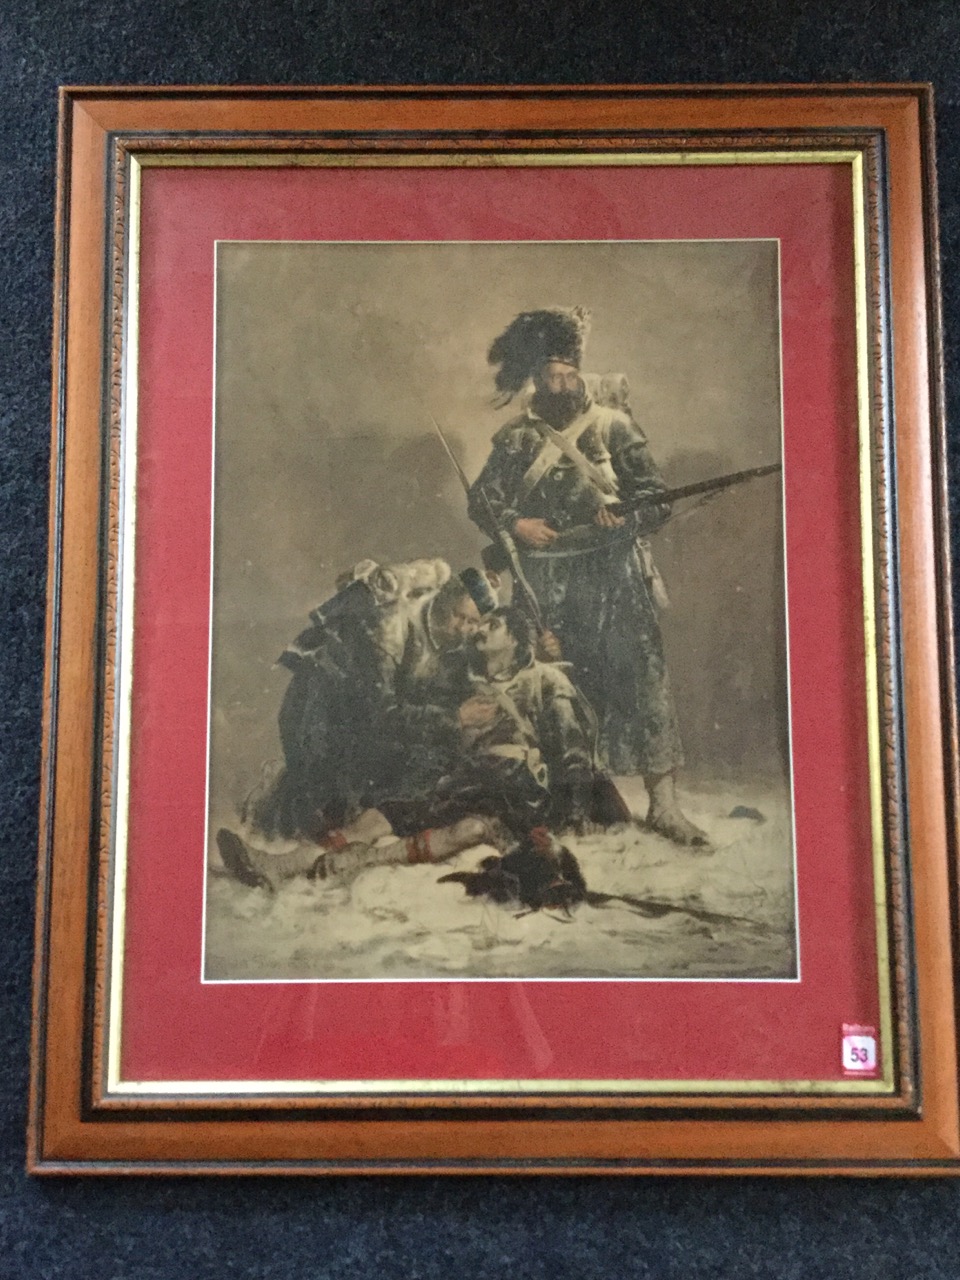 Robert Gibb, a 1980s reproduction limited edition print, titled Comrades, the Crimean War image - Bild 2 aus 3